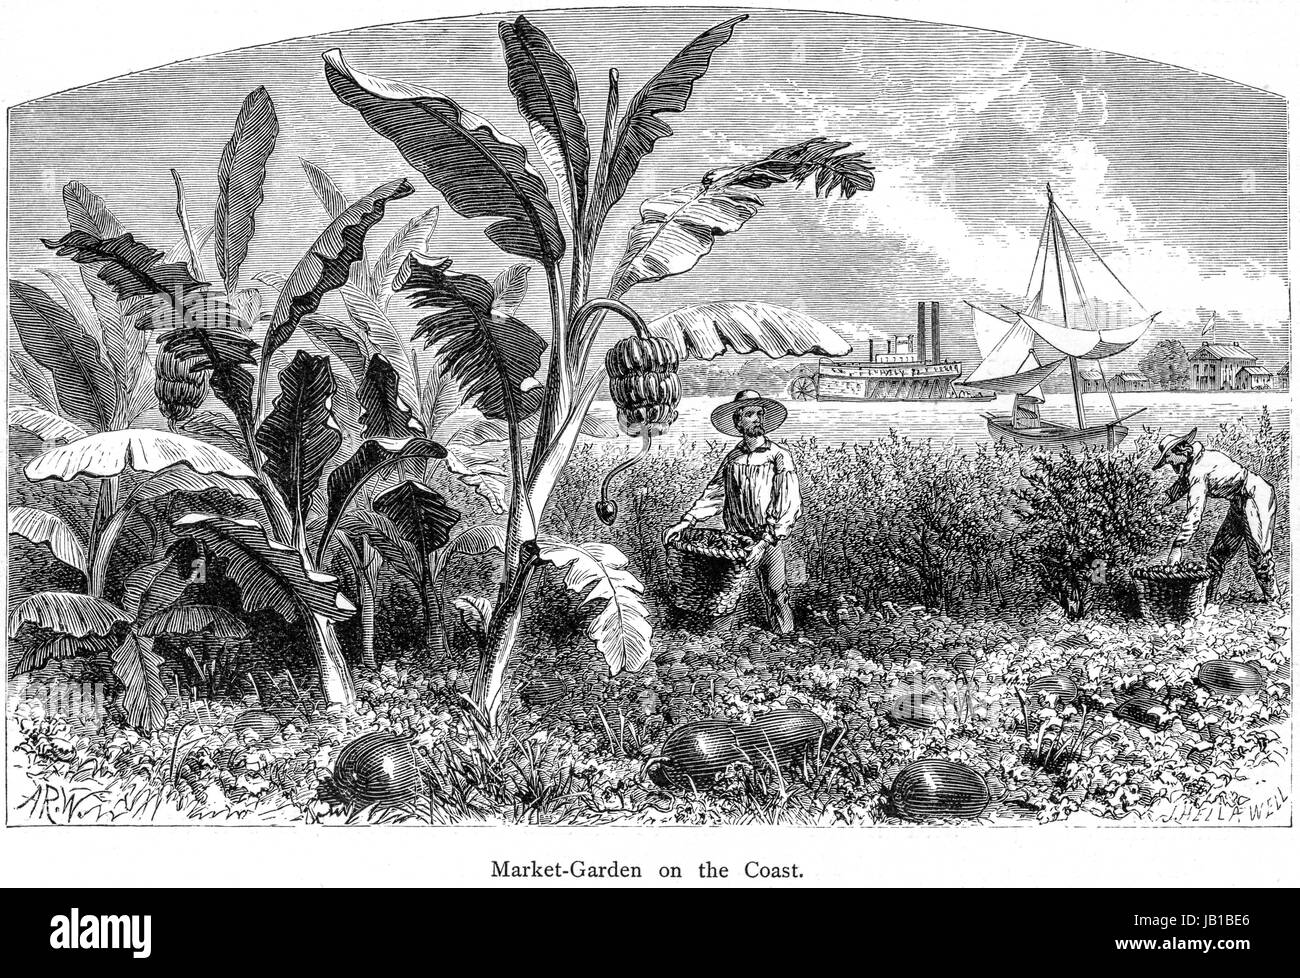 Engraving of a Market Garden on the Coast of the Lower Mississippi scanned at high resolution from a book printed in 1872.  Believed copyright free. Stock Photo